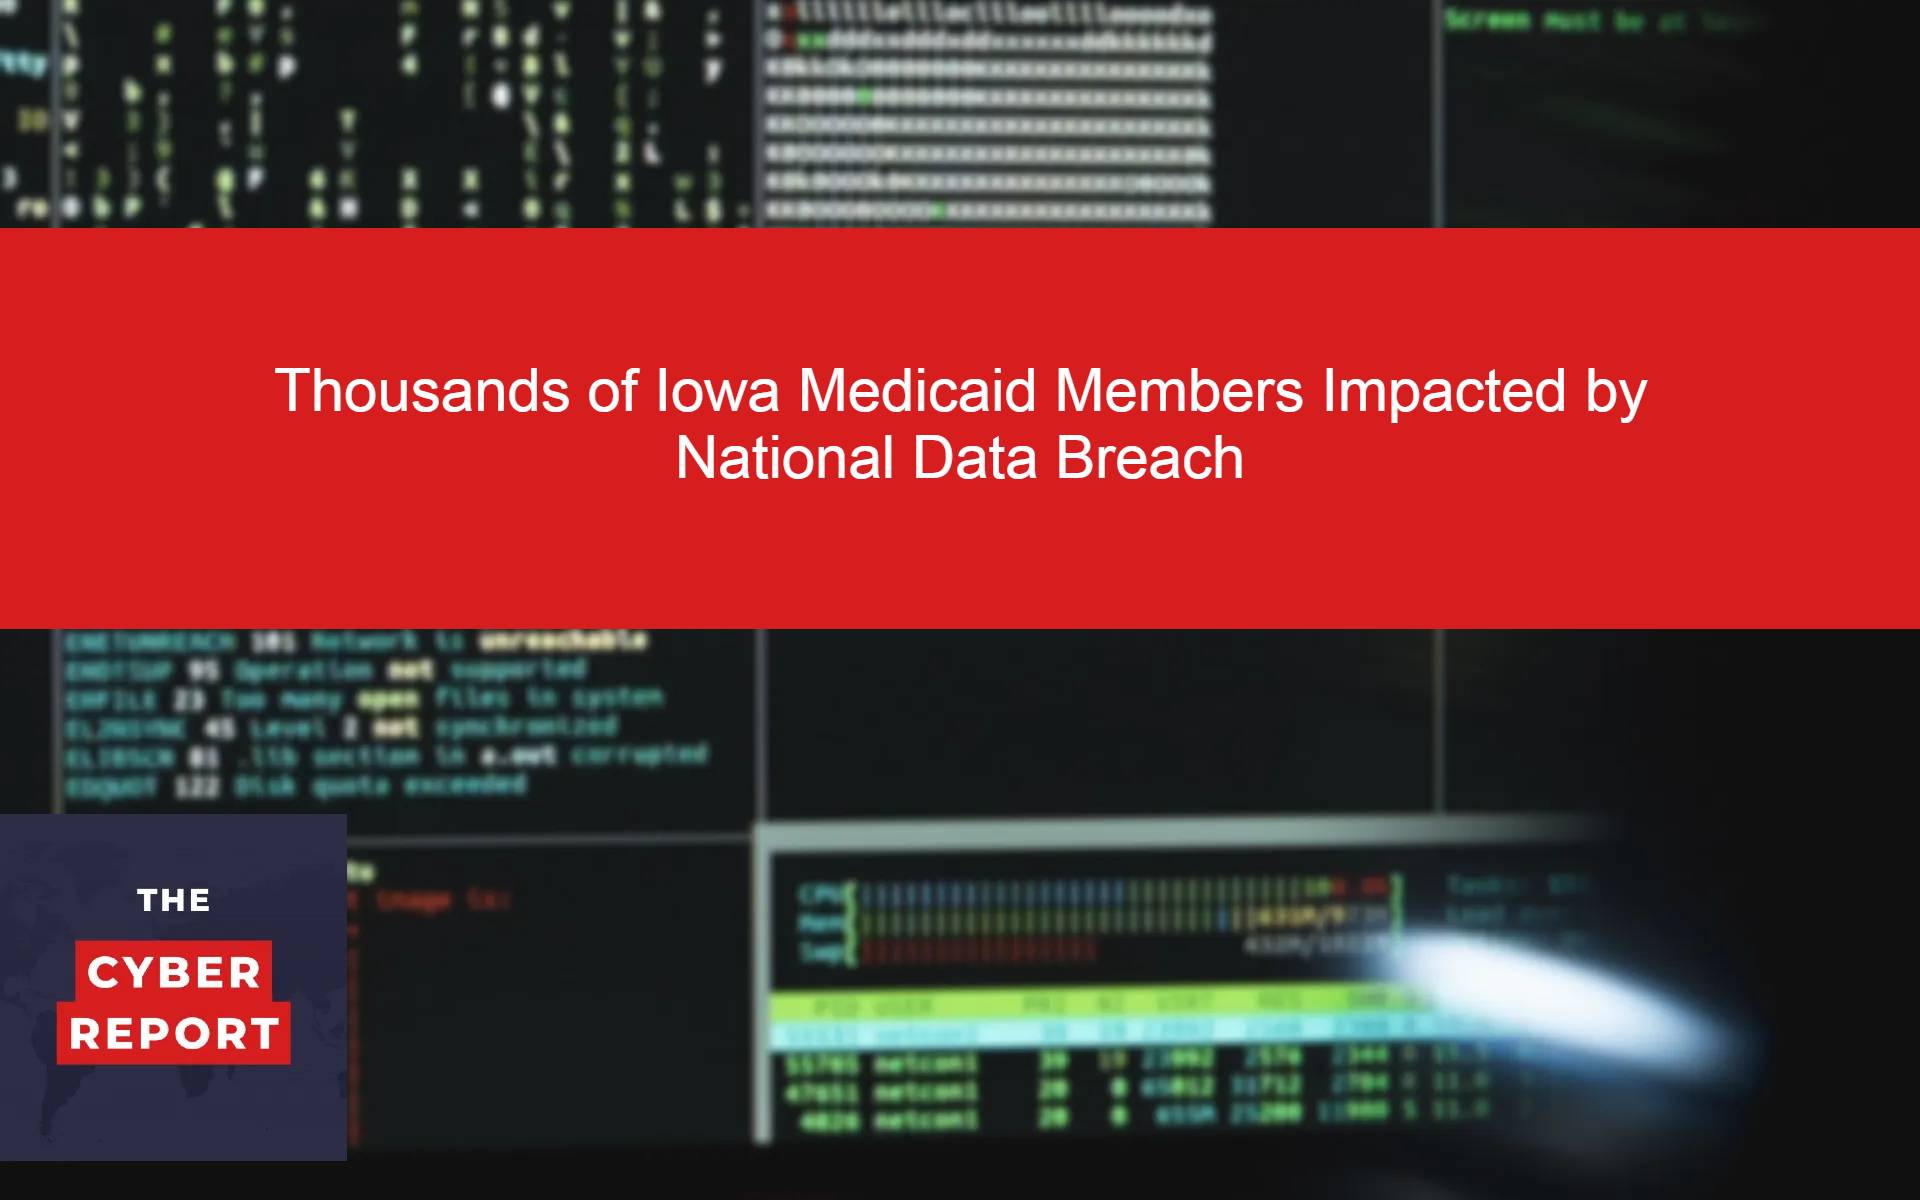 Thousands of Iowa Medicaid Members Impacted by National Data Breach